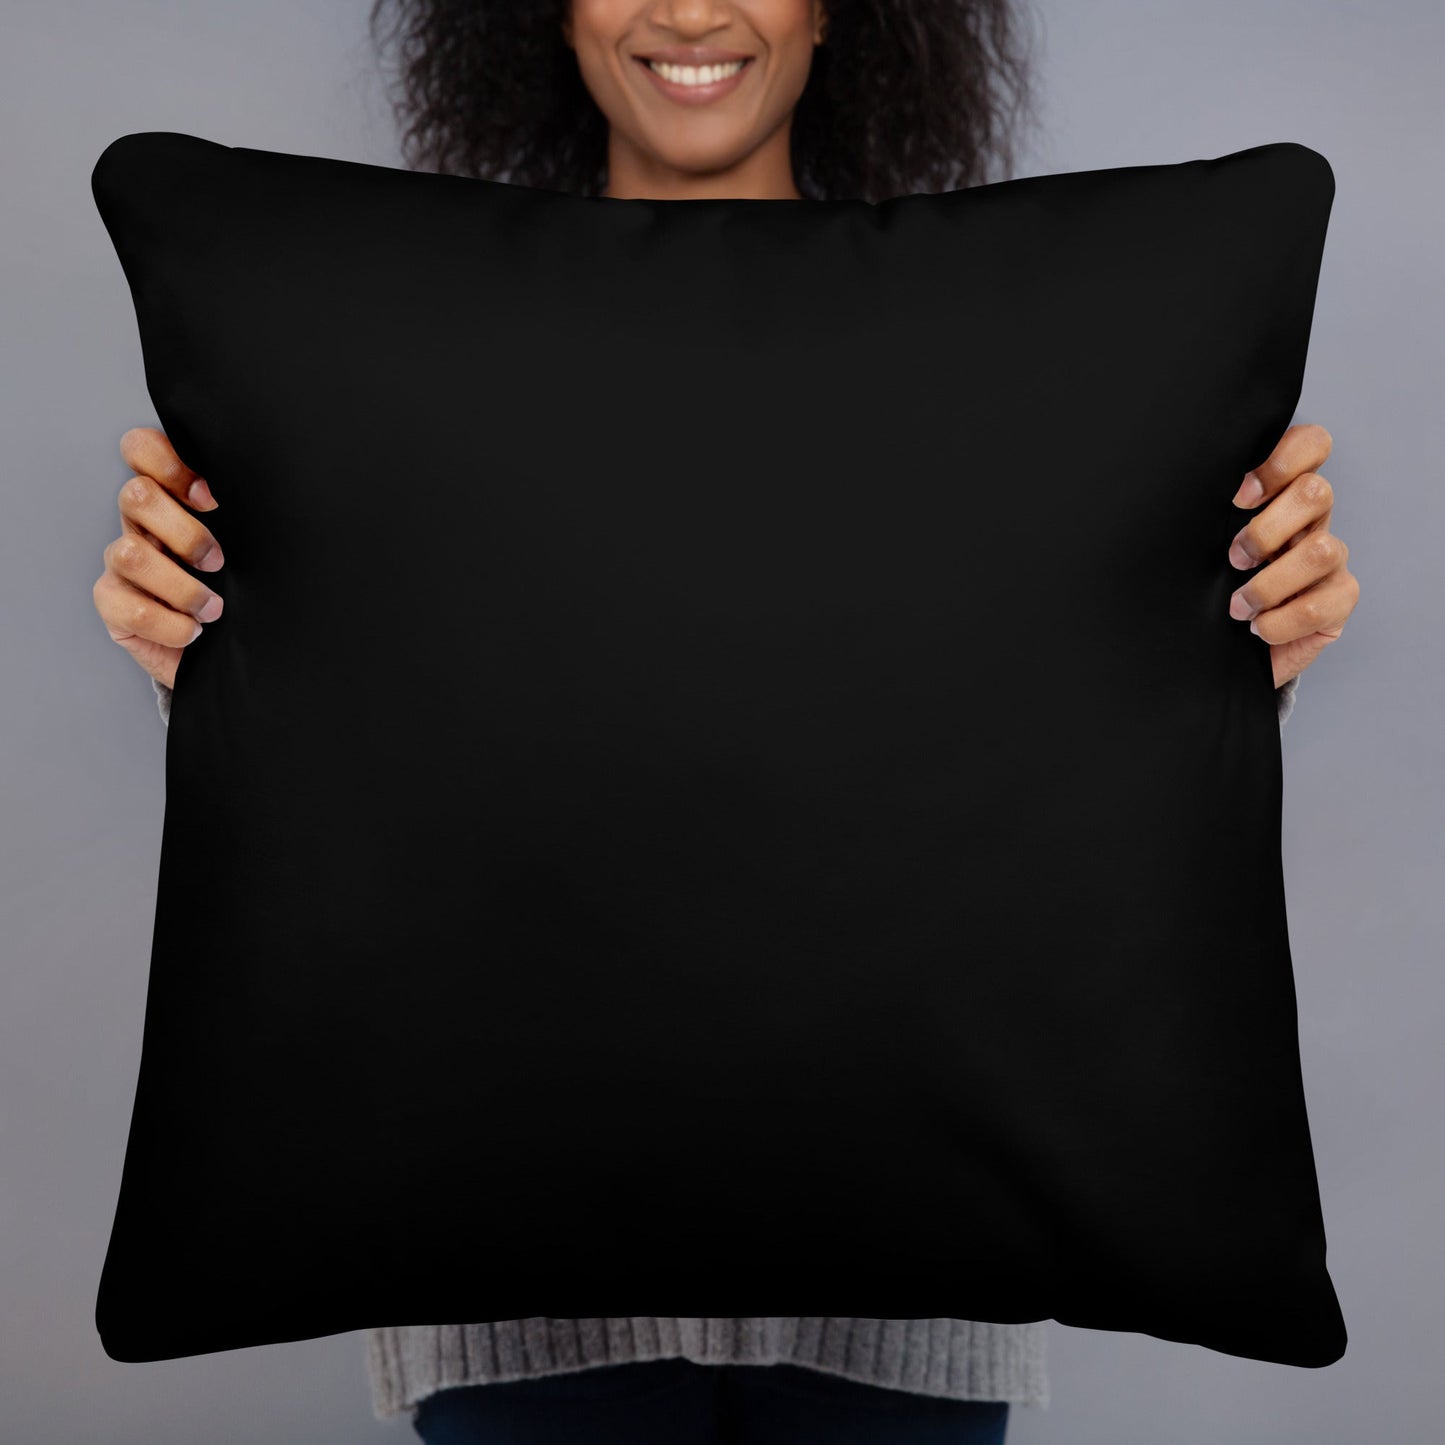 Decorative Throw Pillow | The Baby-Eater (without title) - Spectral Ink Shop - Throw Pillows -5351145_11075